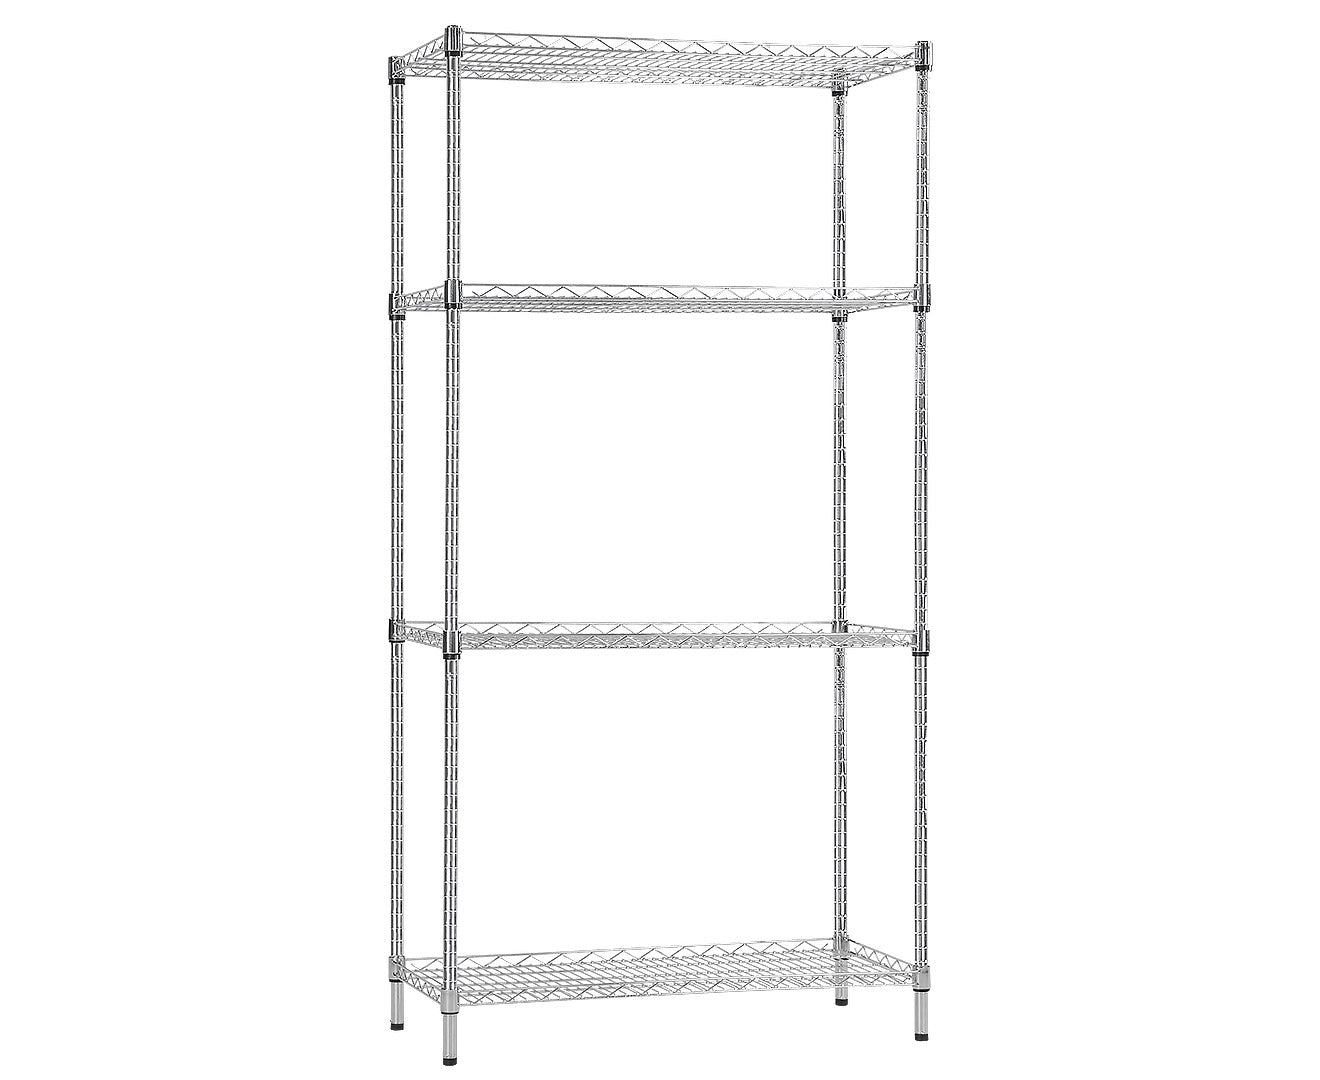 Syncrosteel Chrome Wire Shelving Storage Unit 1200x350mm - 1.8 m high